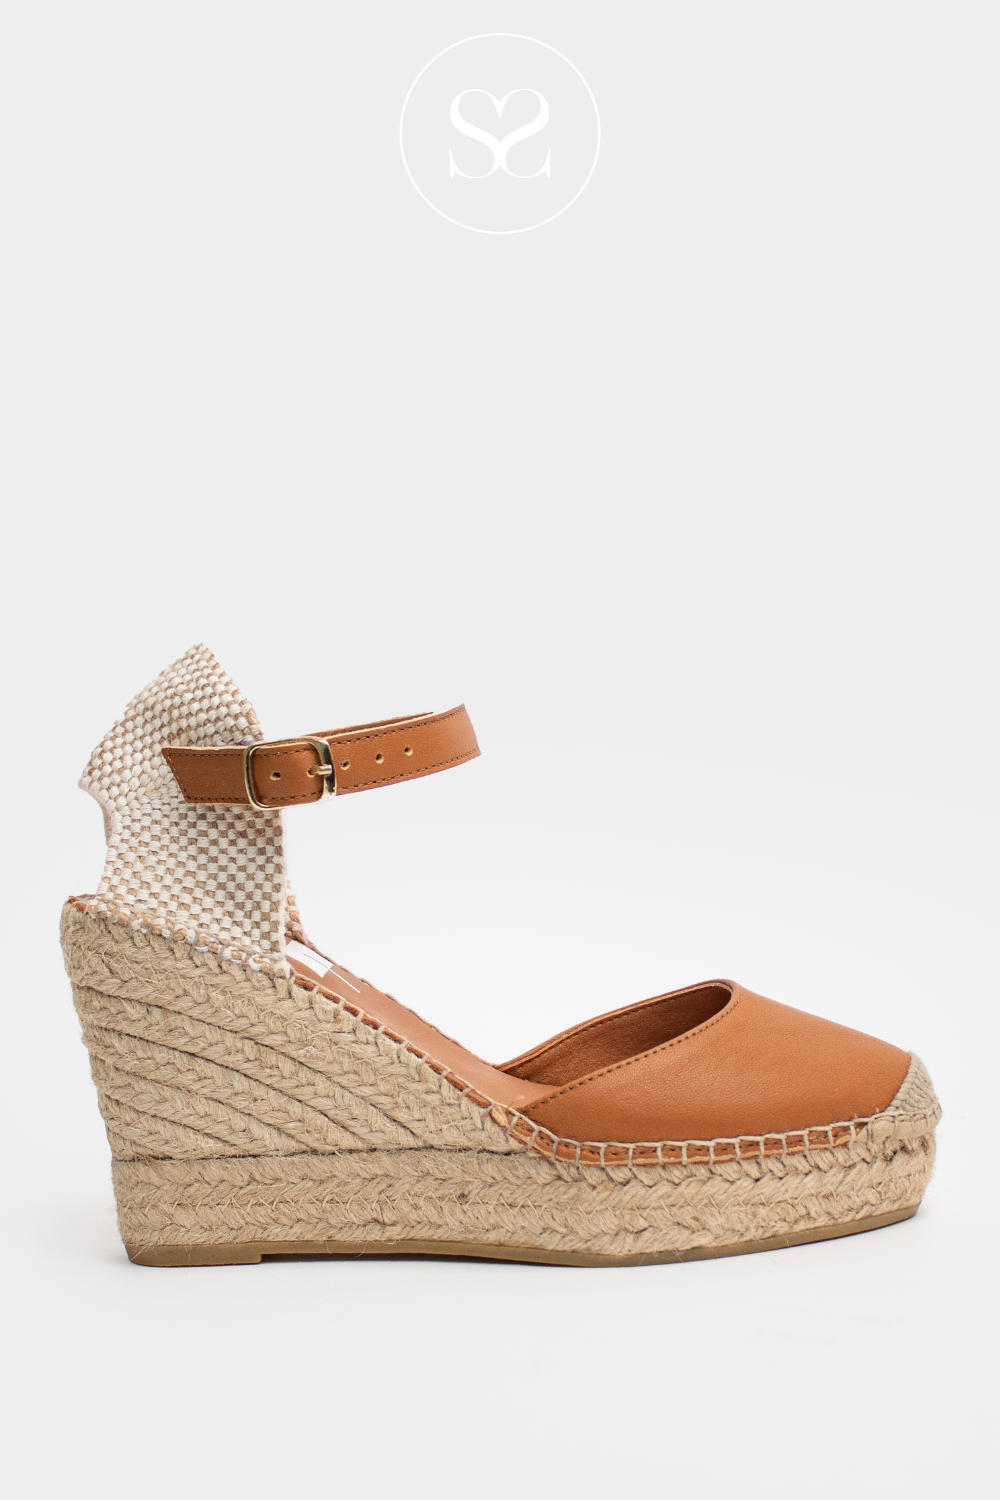 VIGUERA 1632 TAN WEDGE ESPADRILLE SANDALS WITH PLATFORM SOLE AND ANKLE STRAP